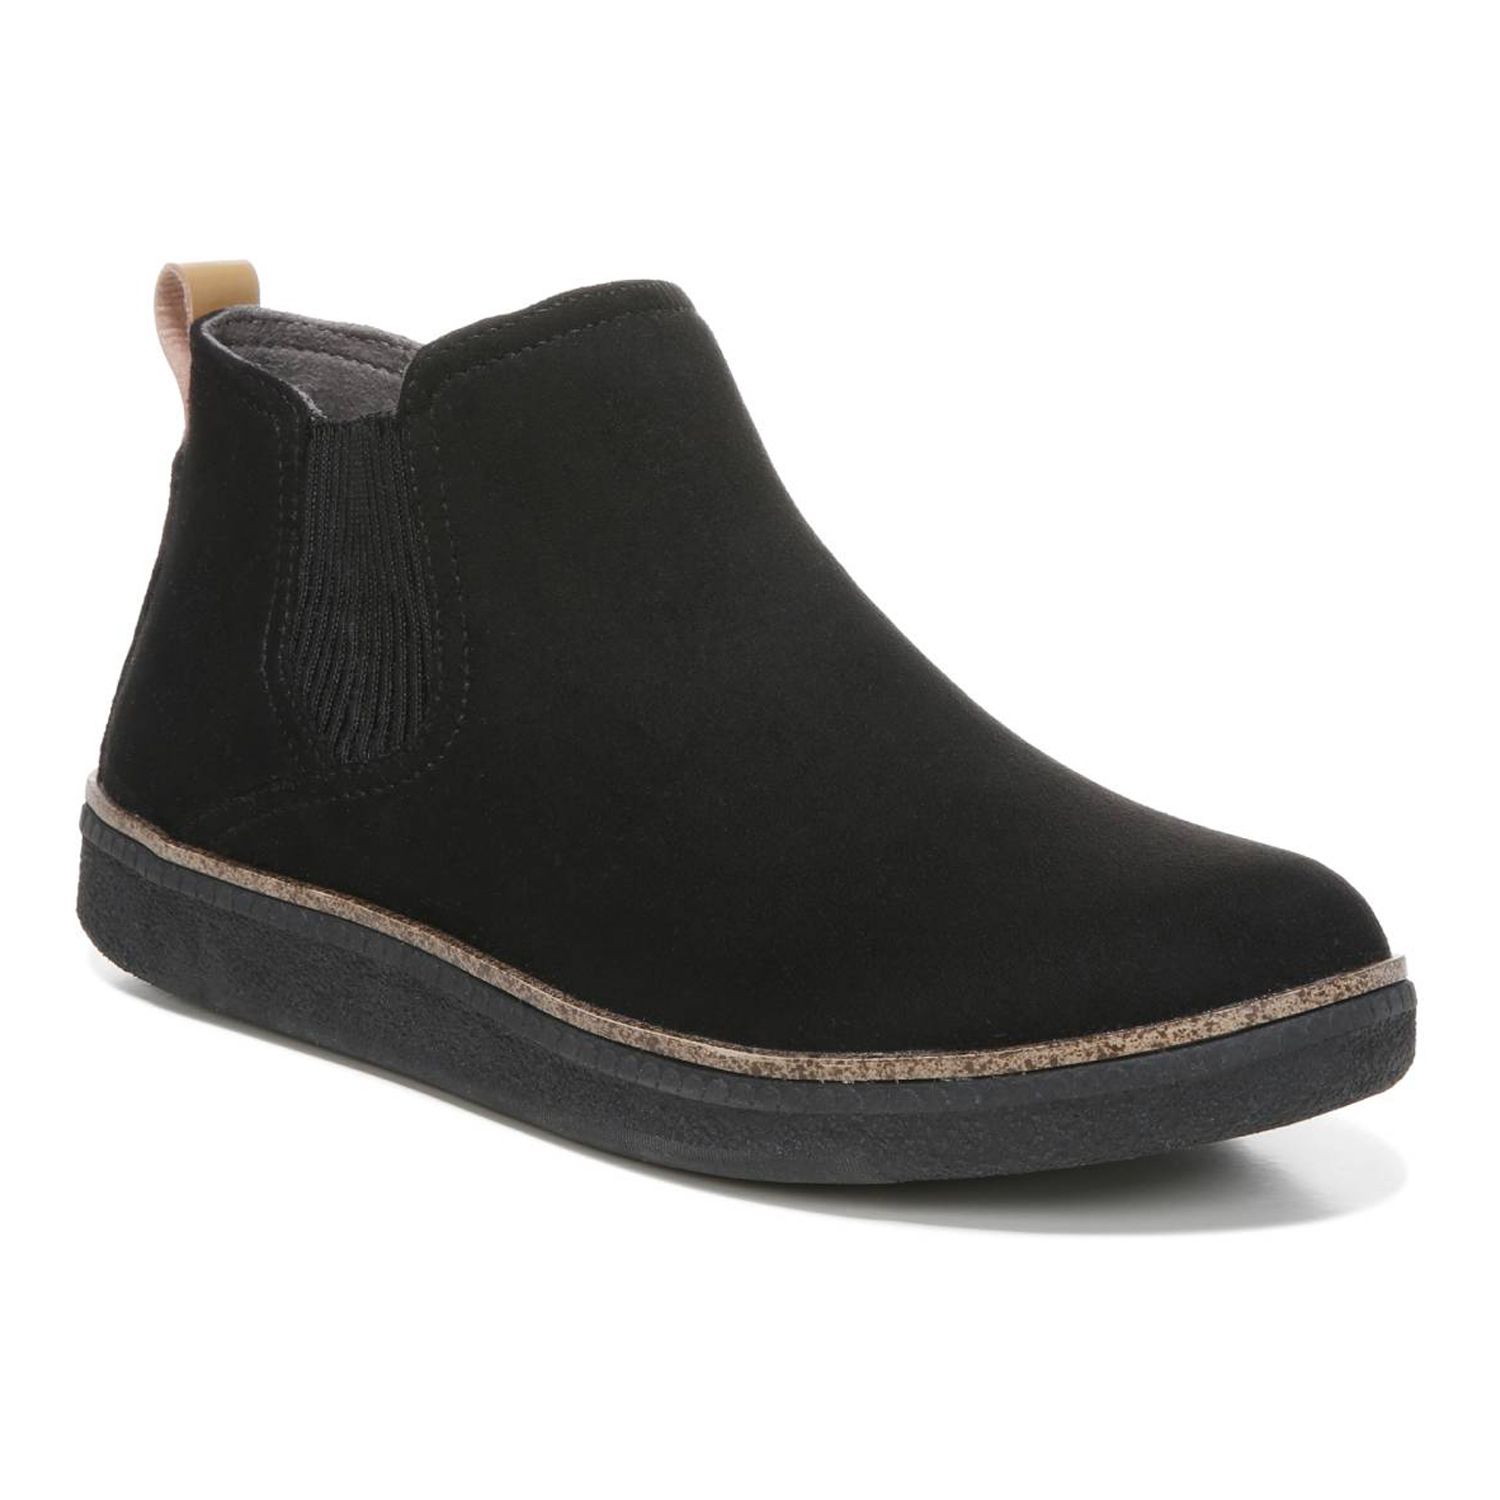 Image for Dr. Scholl's See Me Women's Chelsea Boots at Kohl's.